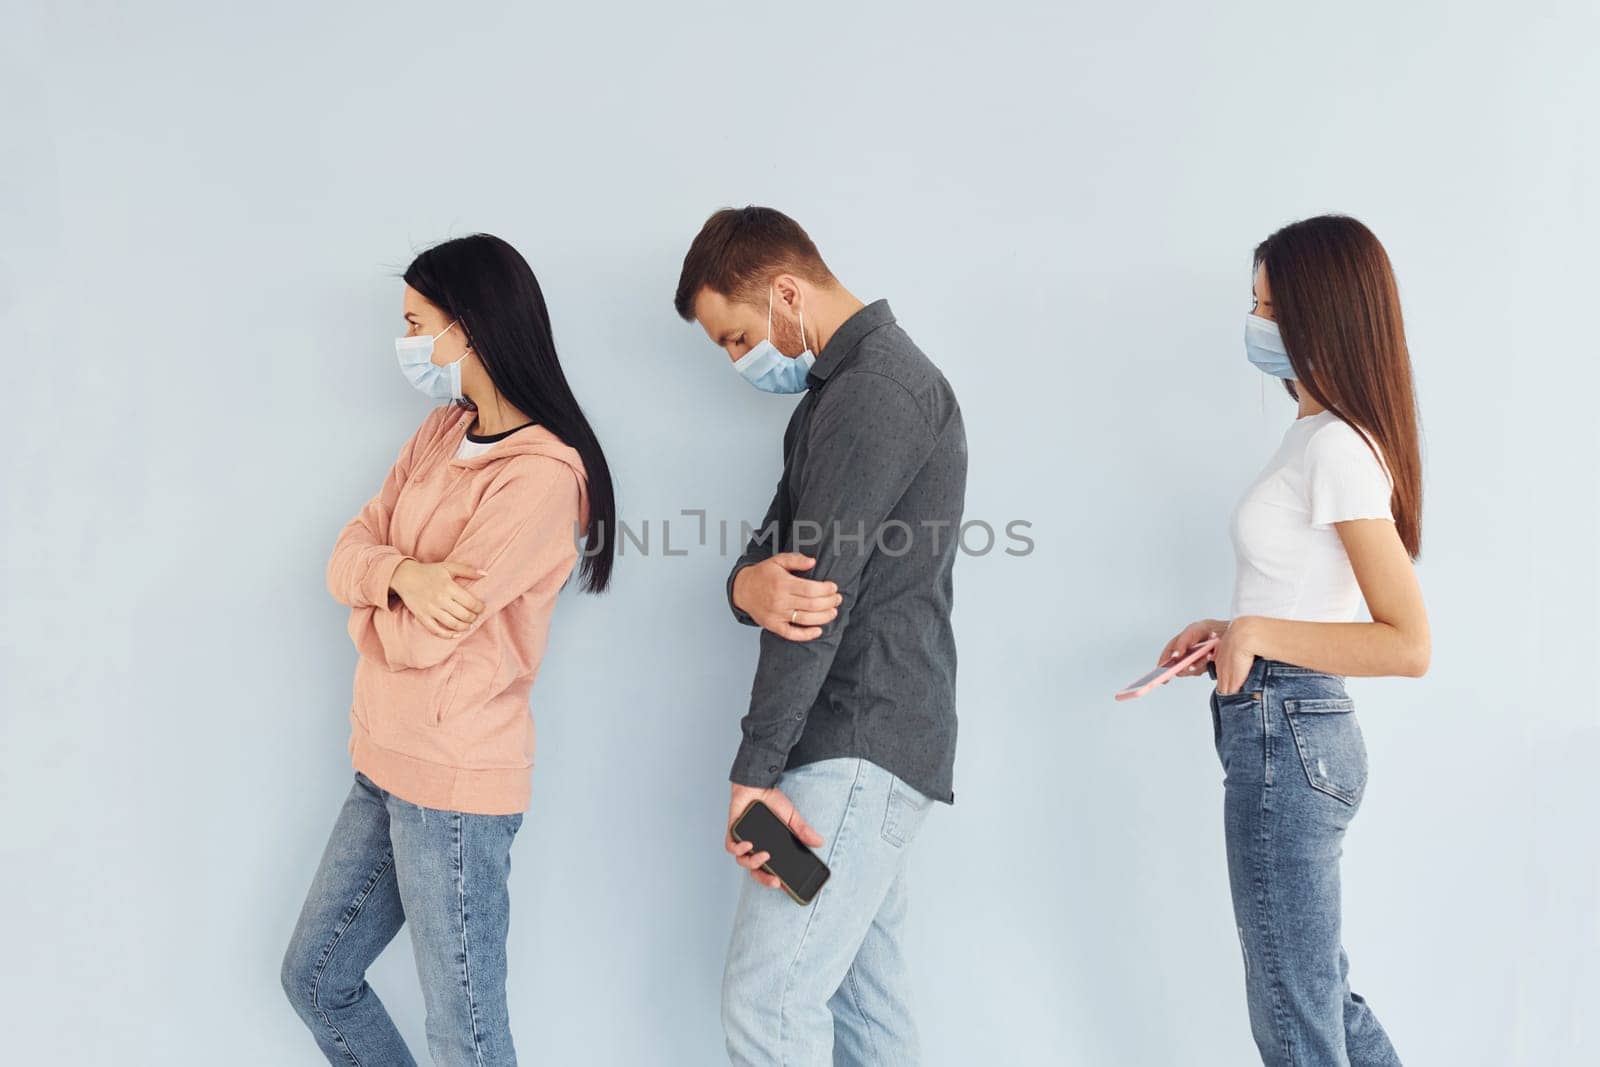 Three people standing together in the studio against white background by Standret